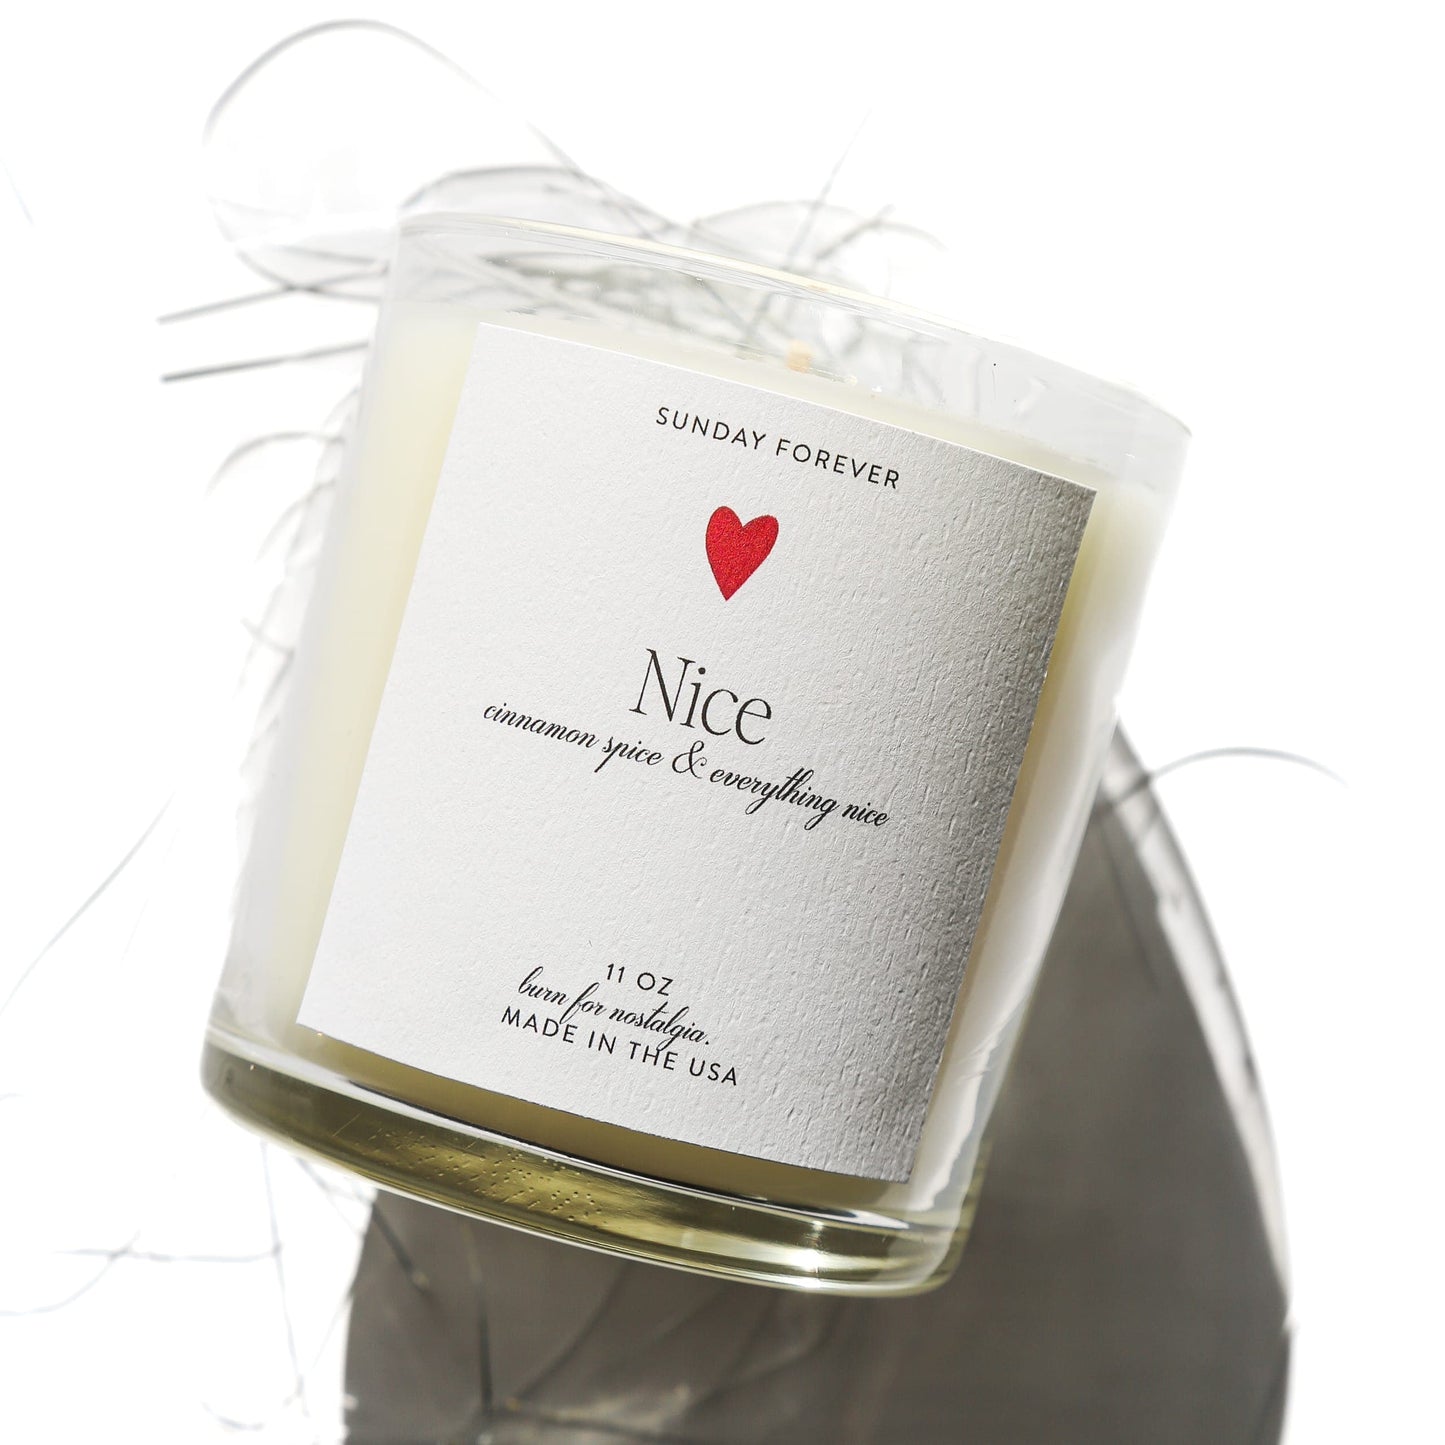 NEW! Limited Edition Nice Luxury Candle with Cinnamon and Spice - Candles-Sunday Forever